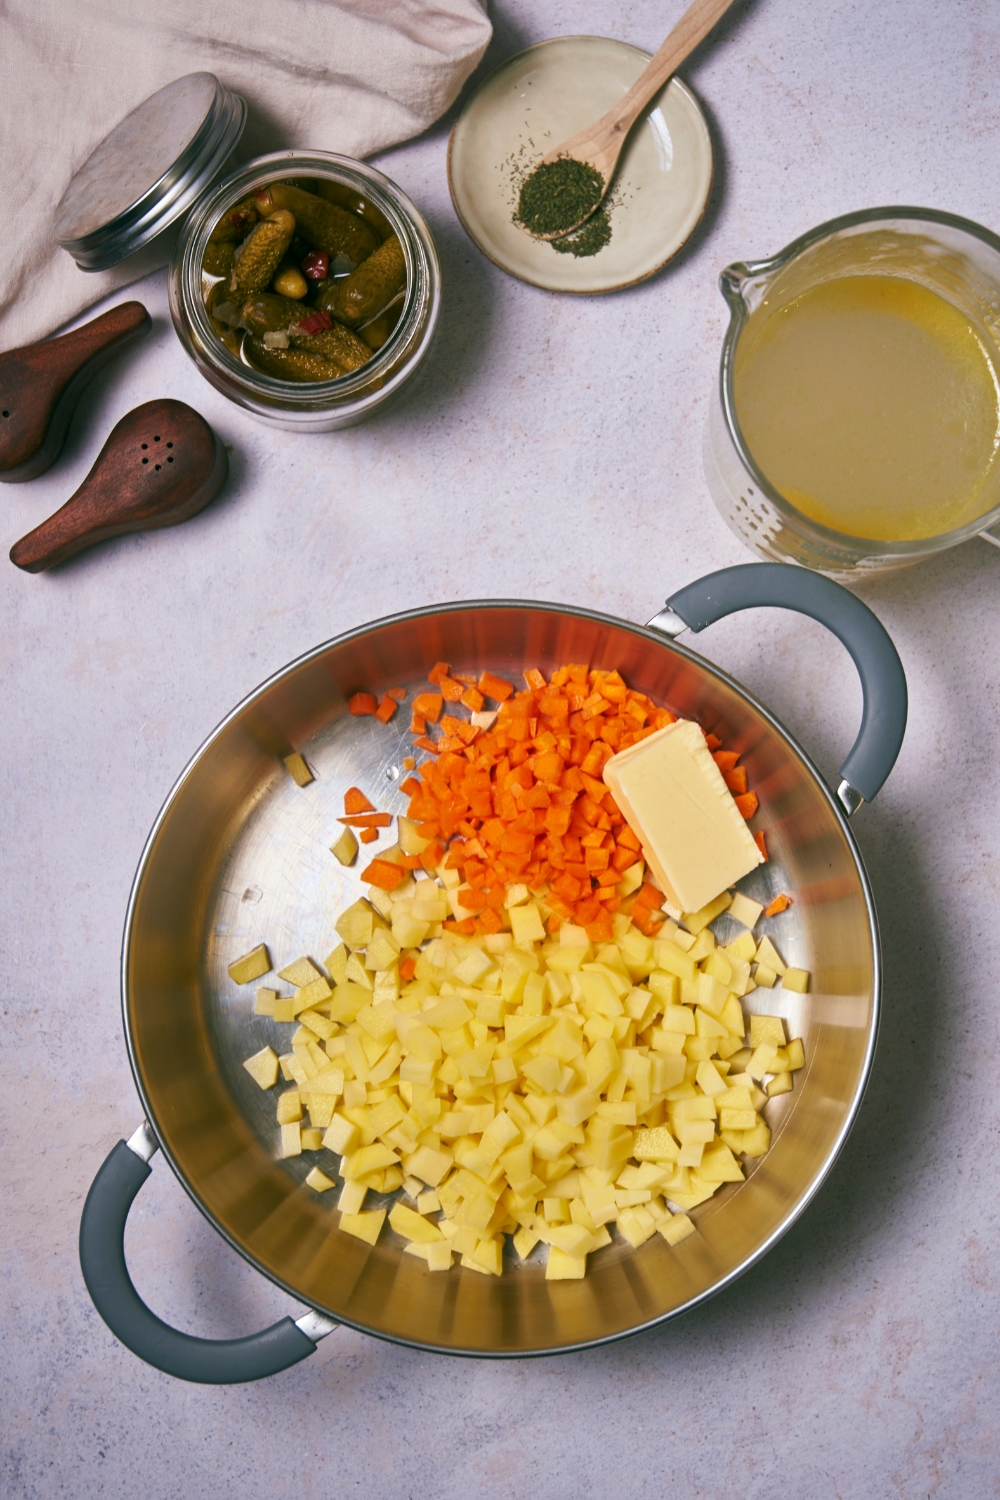 Diced potatoes, diced carrots, and a cube of butter in a pot.